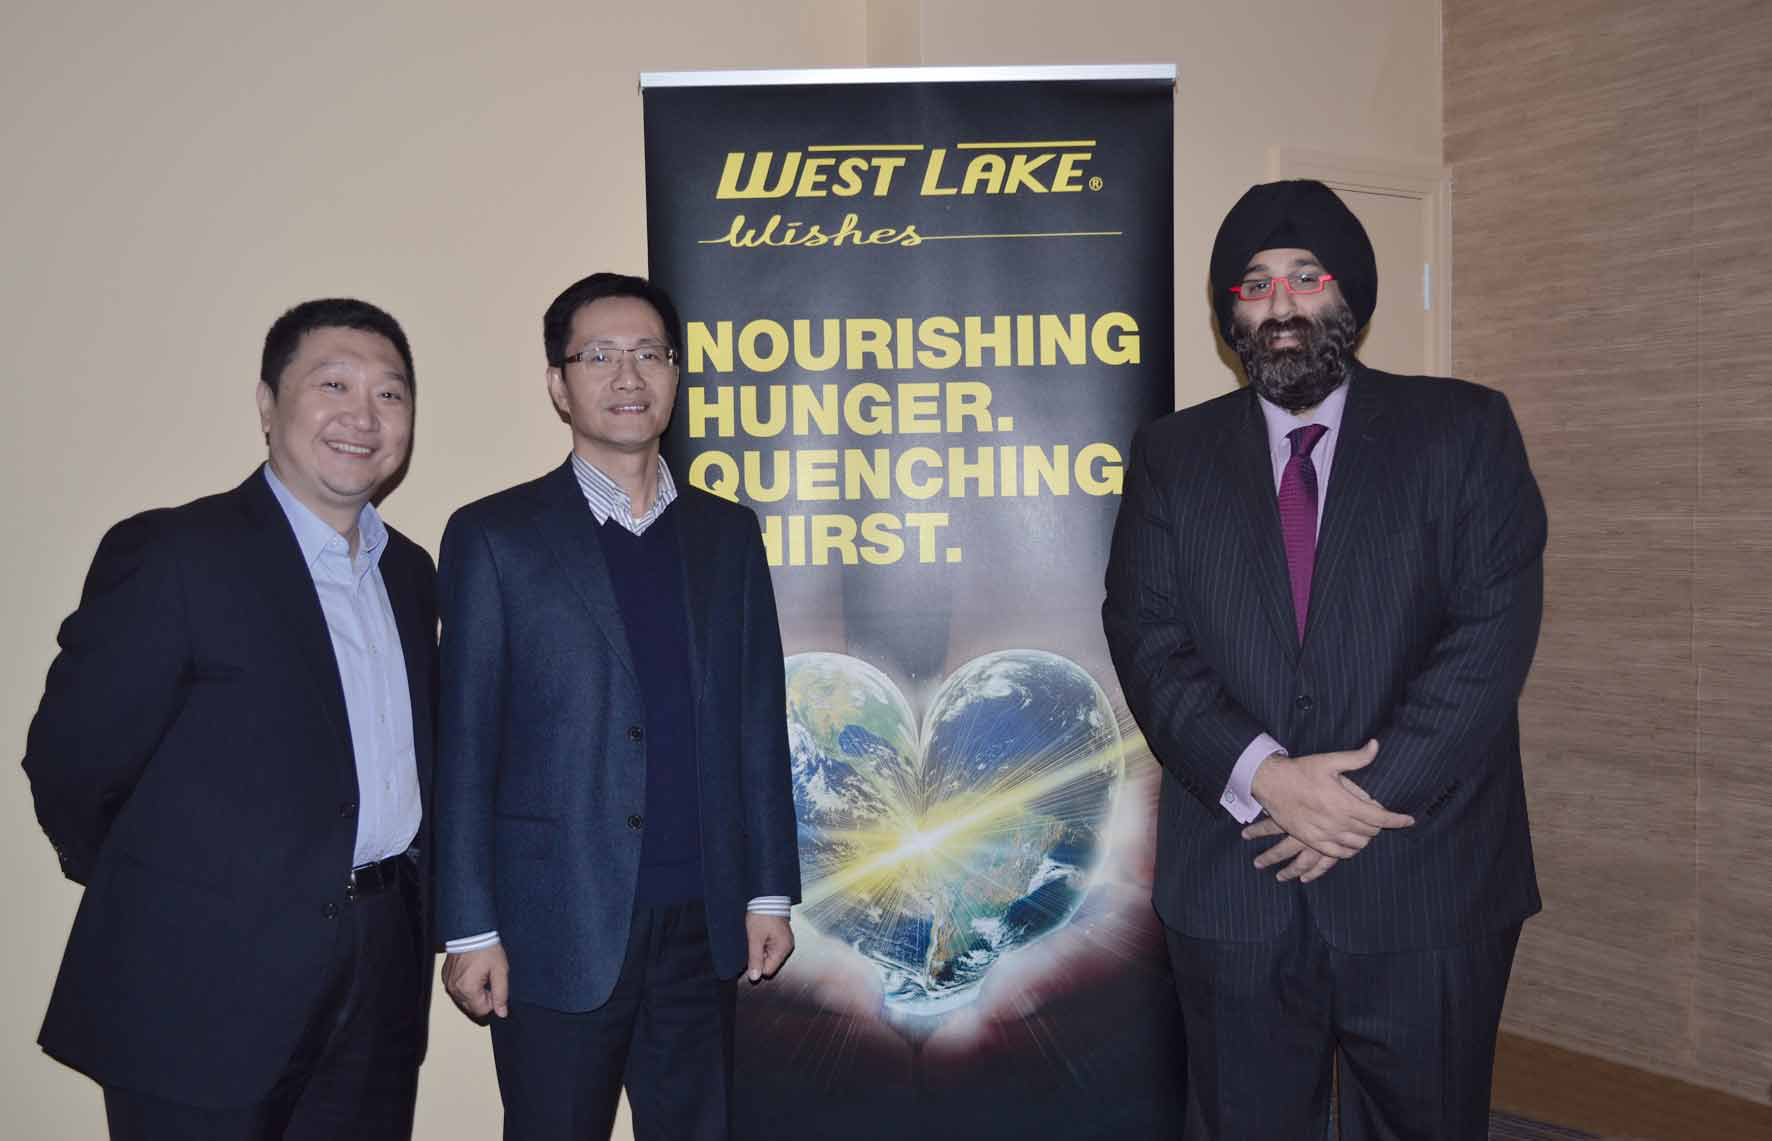 Westlake Wishes foundation launched